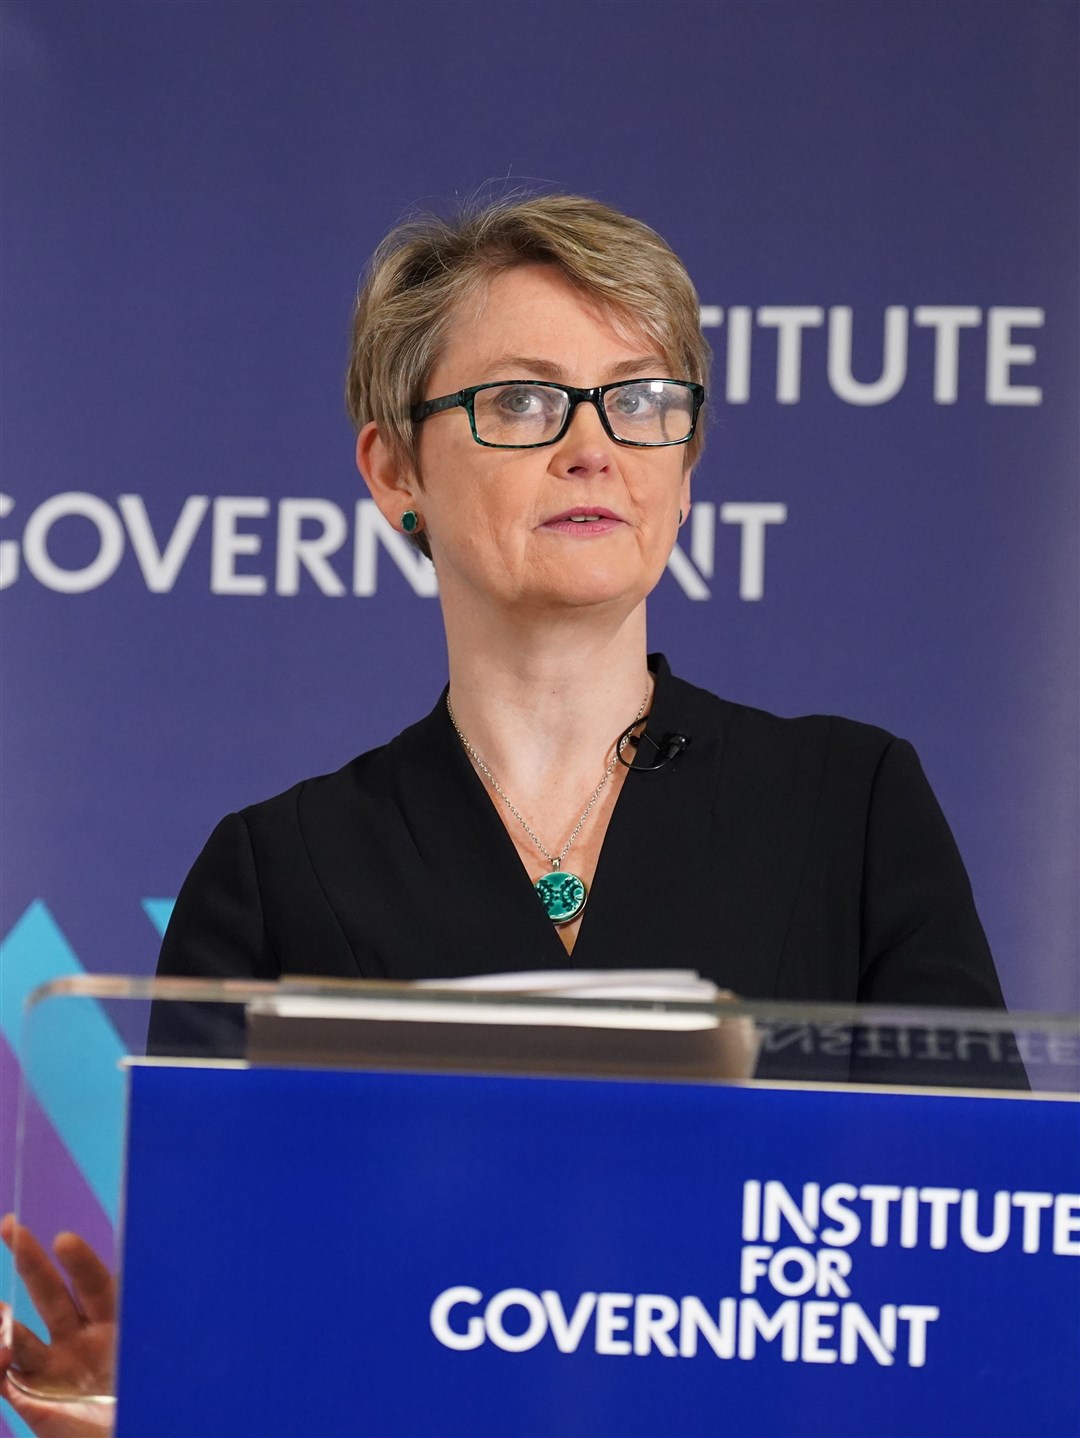 Shadow home secretary Yvette Cooper delivers her speech at the Institute for Government think tank in central London (Stefan Rousseau/PA)